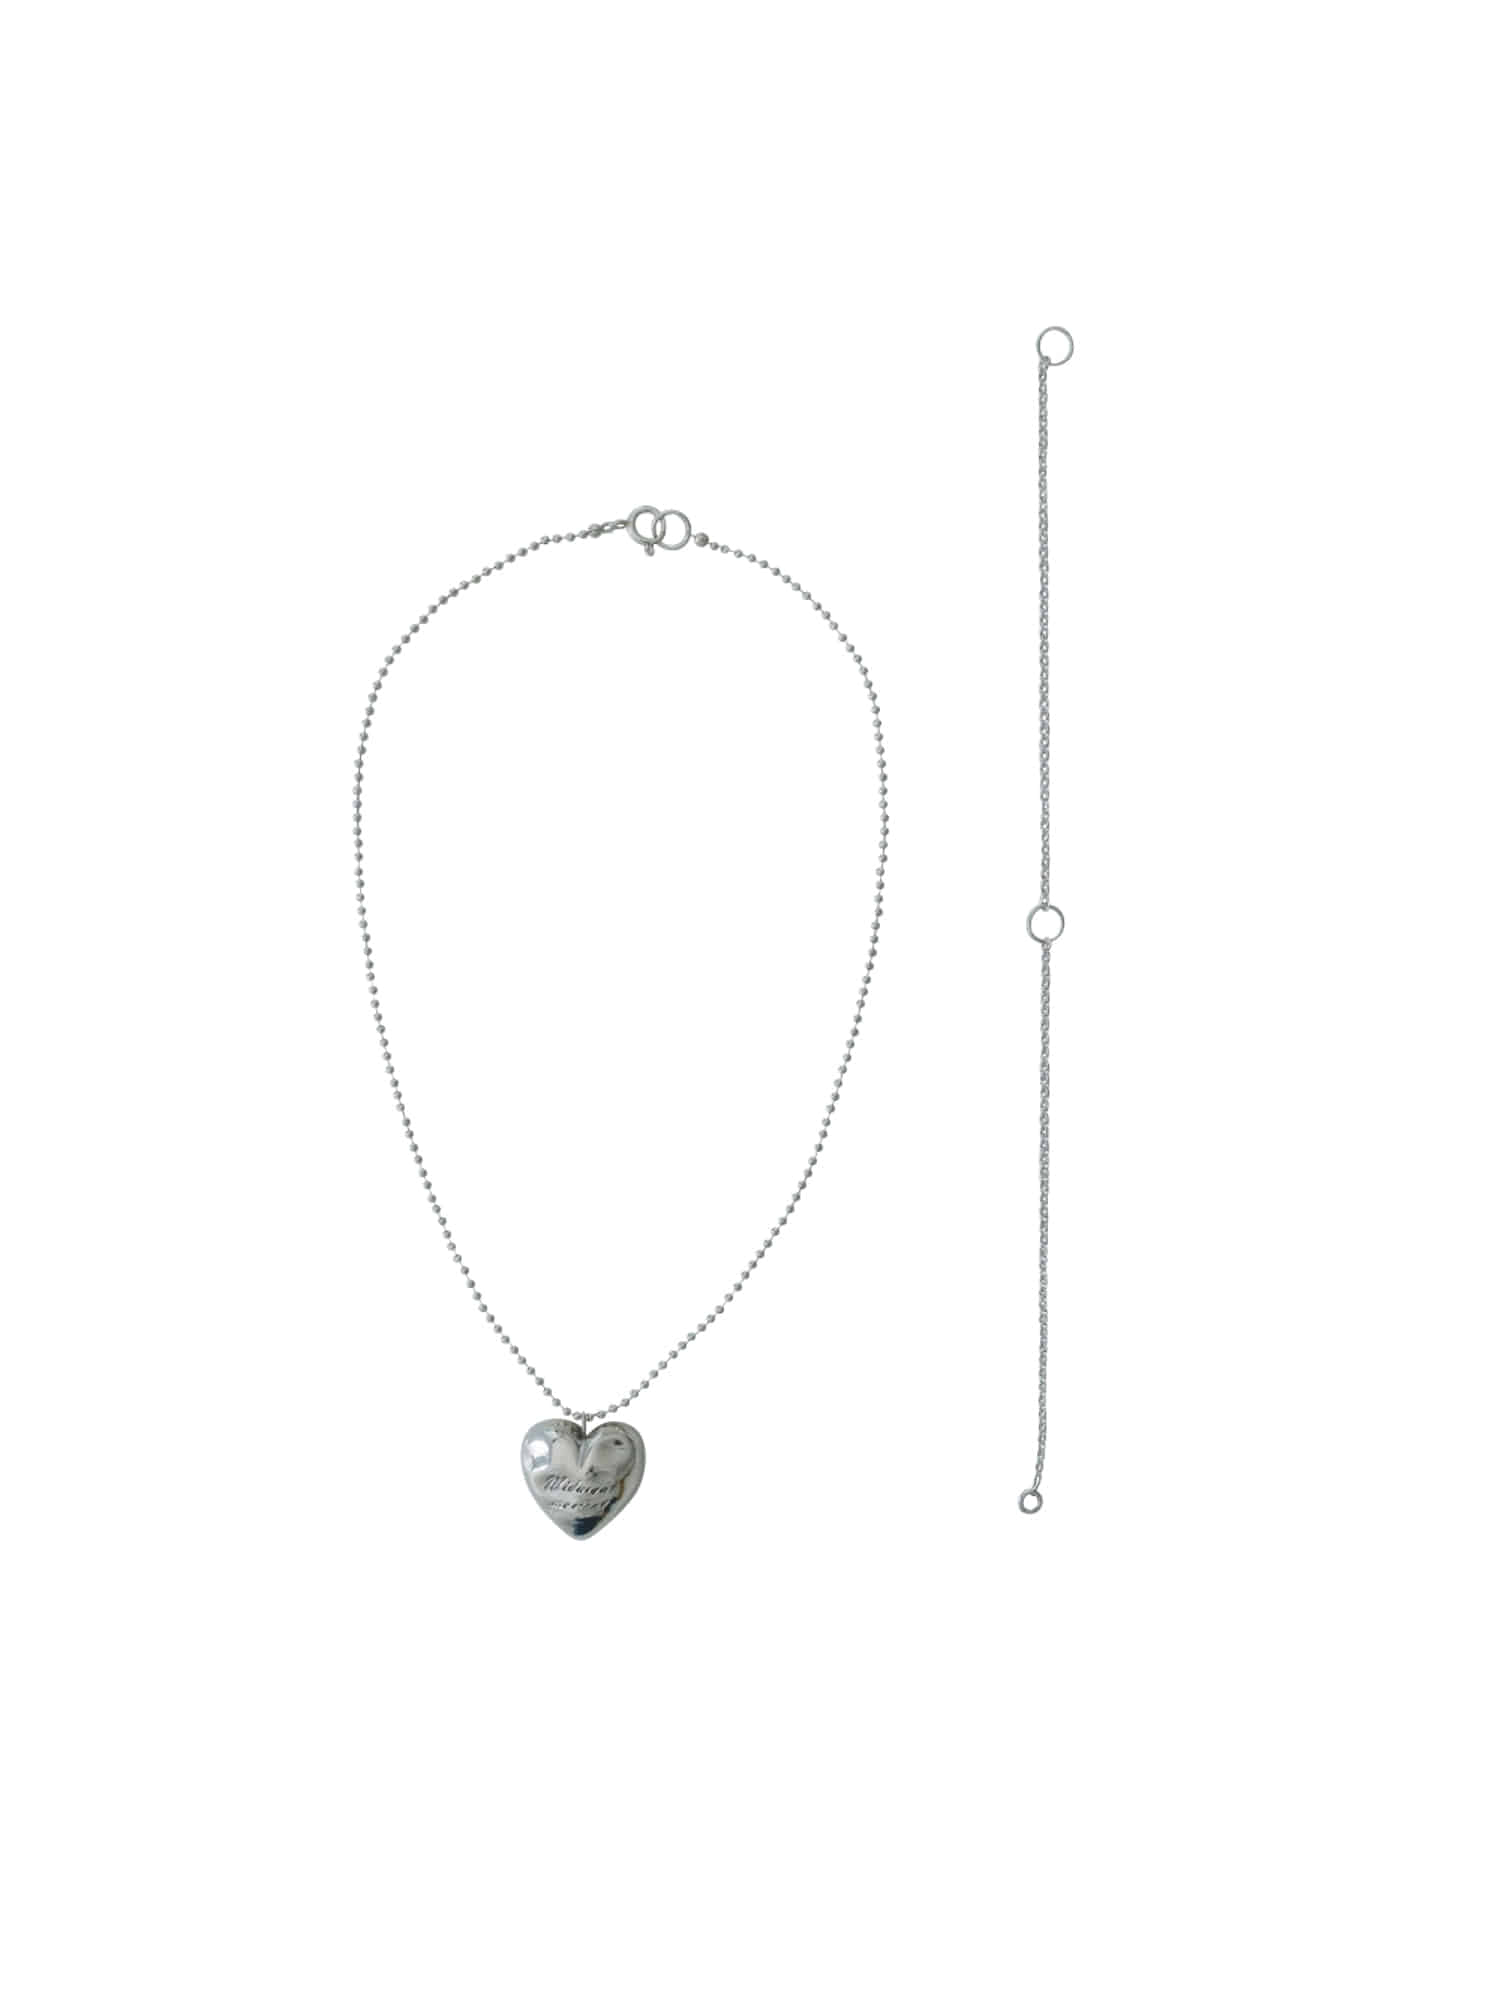 Bumpy Love Chain Necklace - Extension Chain